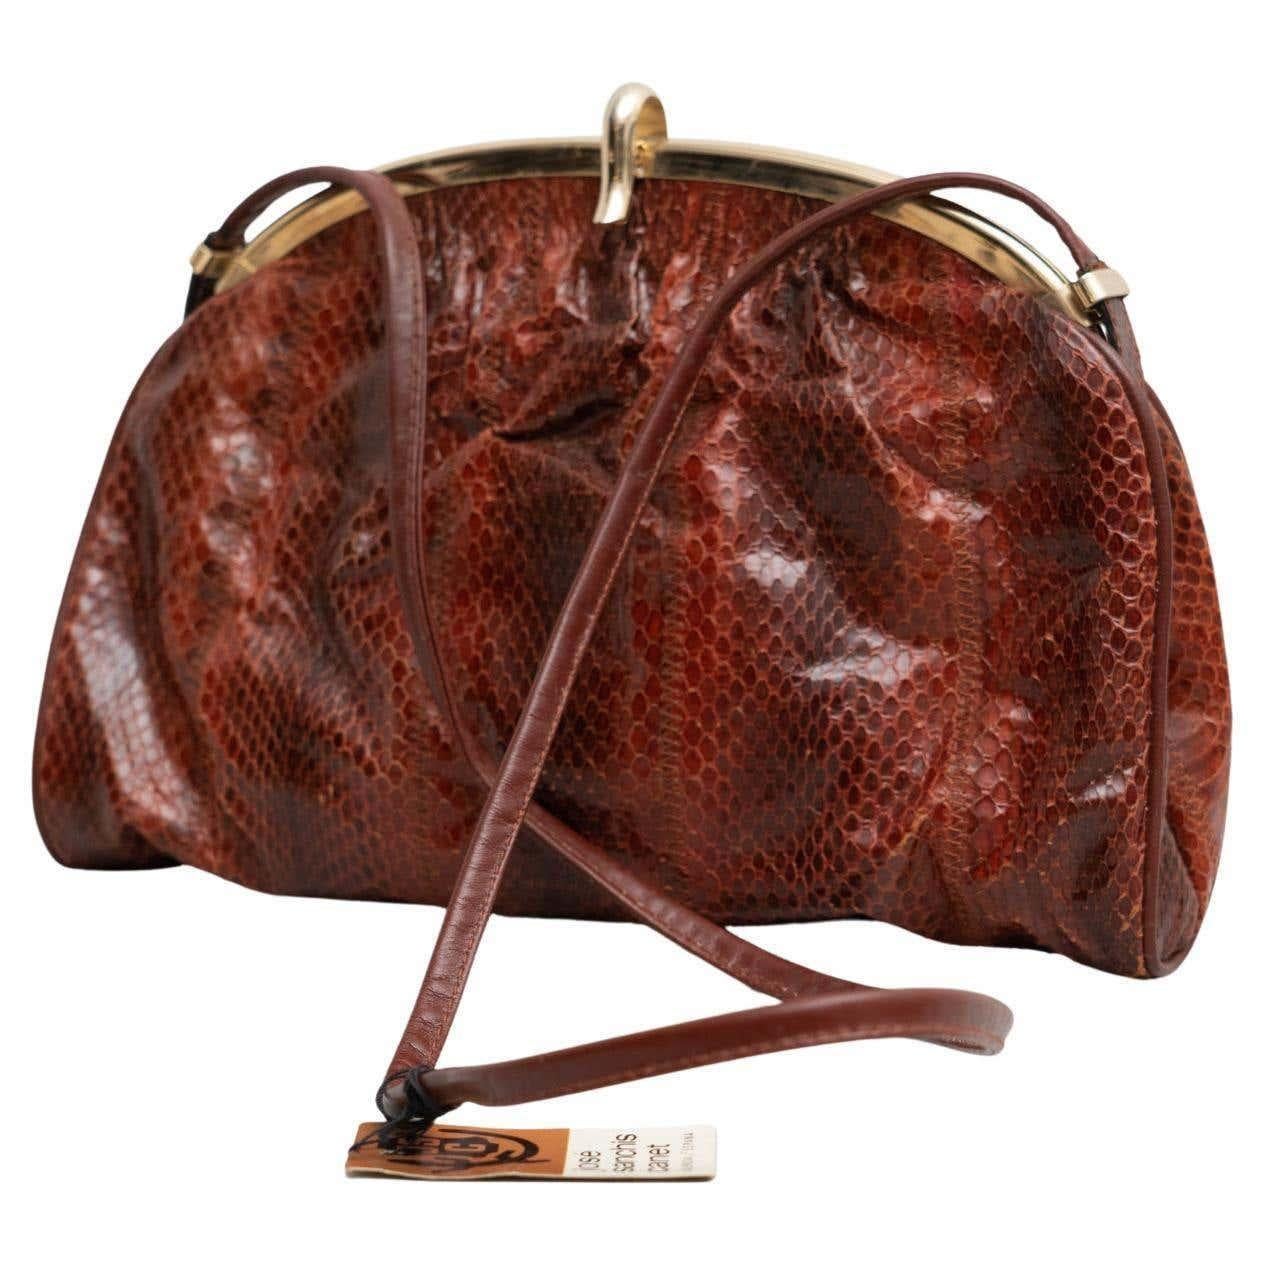 Vintage snakeskin leather bag in brown tones with a golden clasp. With an inside zipped pocket
Long and semi-rigid handle of the same leather. The interior has one compartment.

Manufactured in Spain circa 1950.

Materials:
Snakeskin.